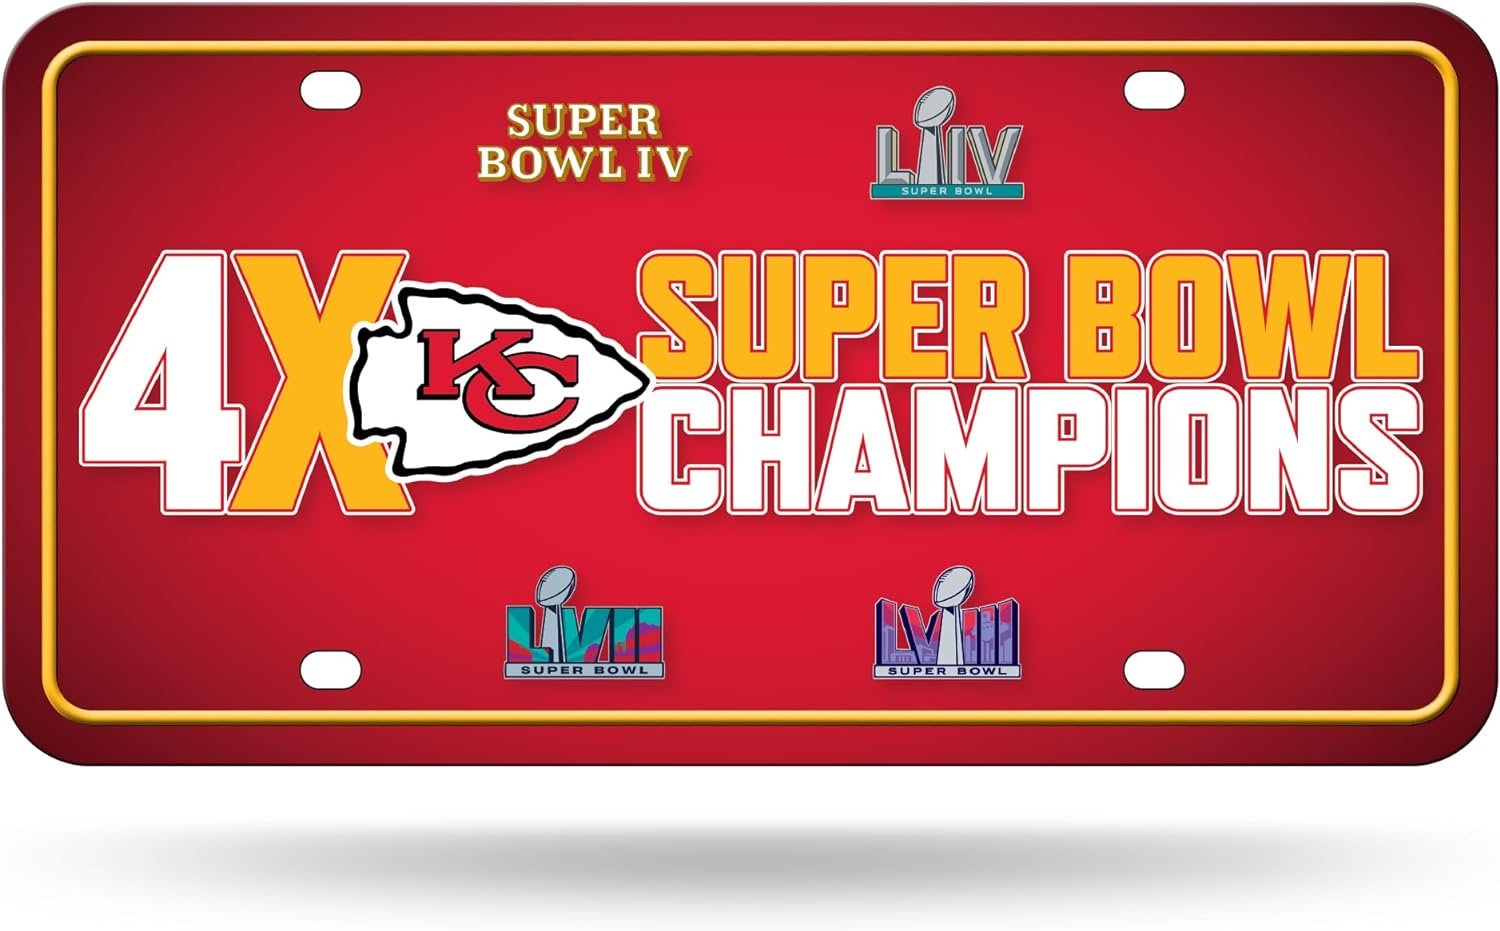 Kansas City Chiefs 4X Super Bowl Champions Metal Auto Tag License Plate, 12x6 Inch, Great for Truck/Car/SUV